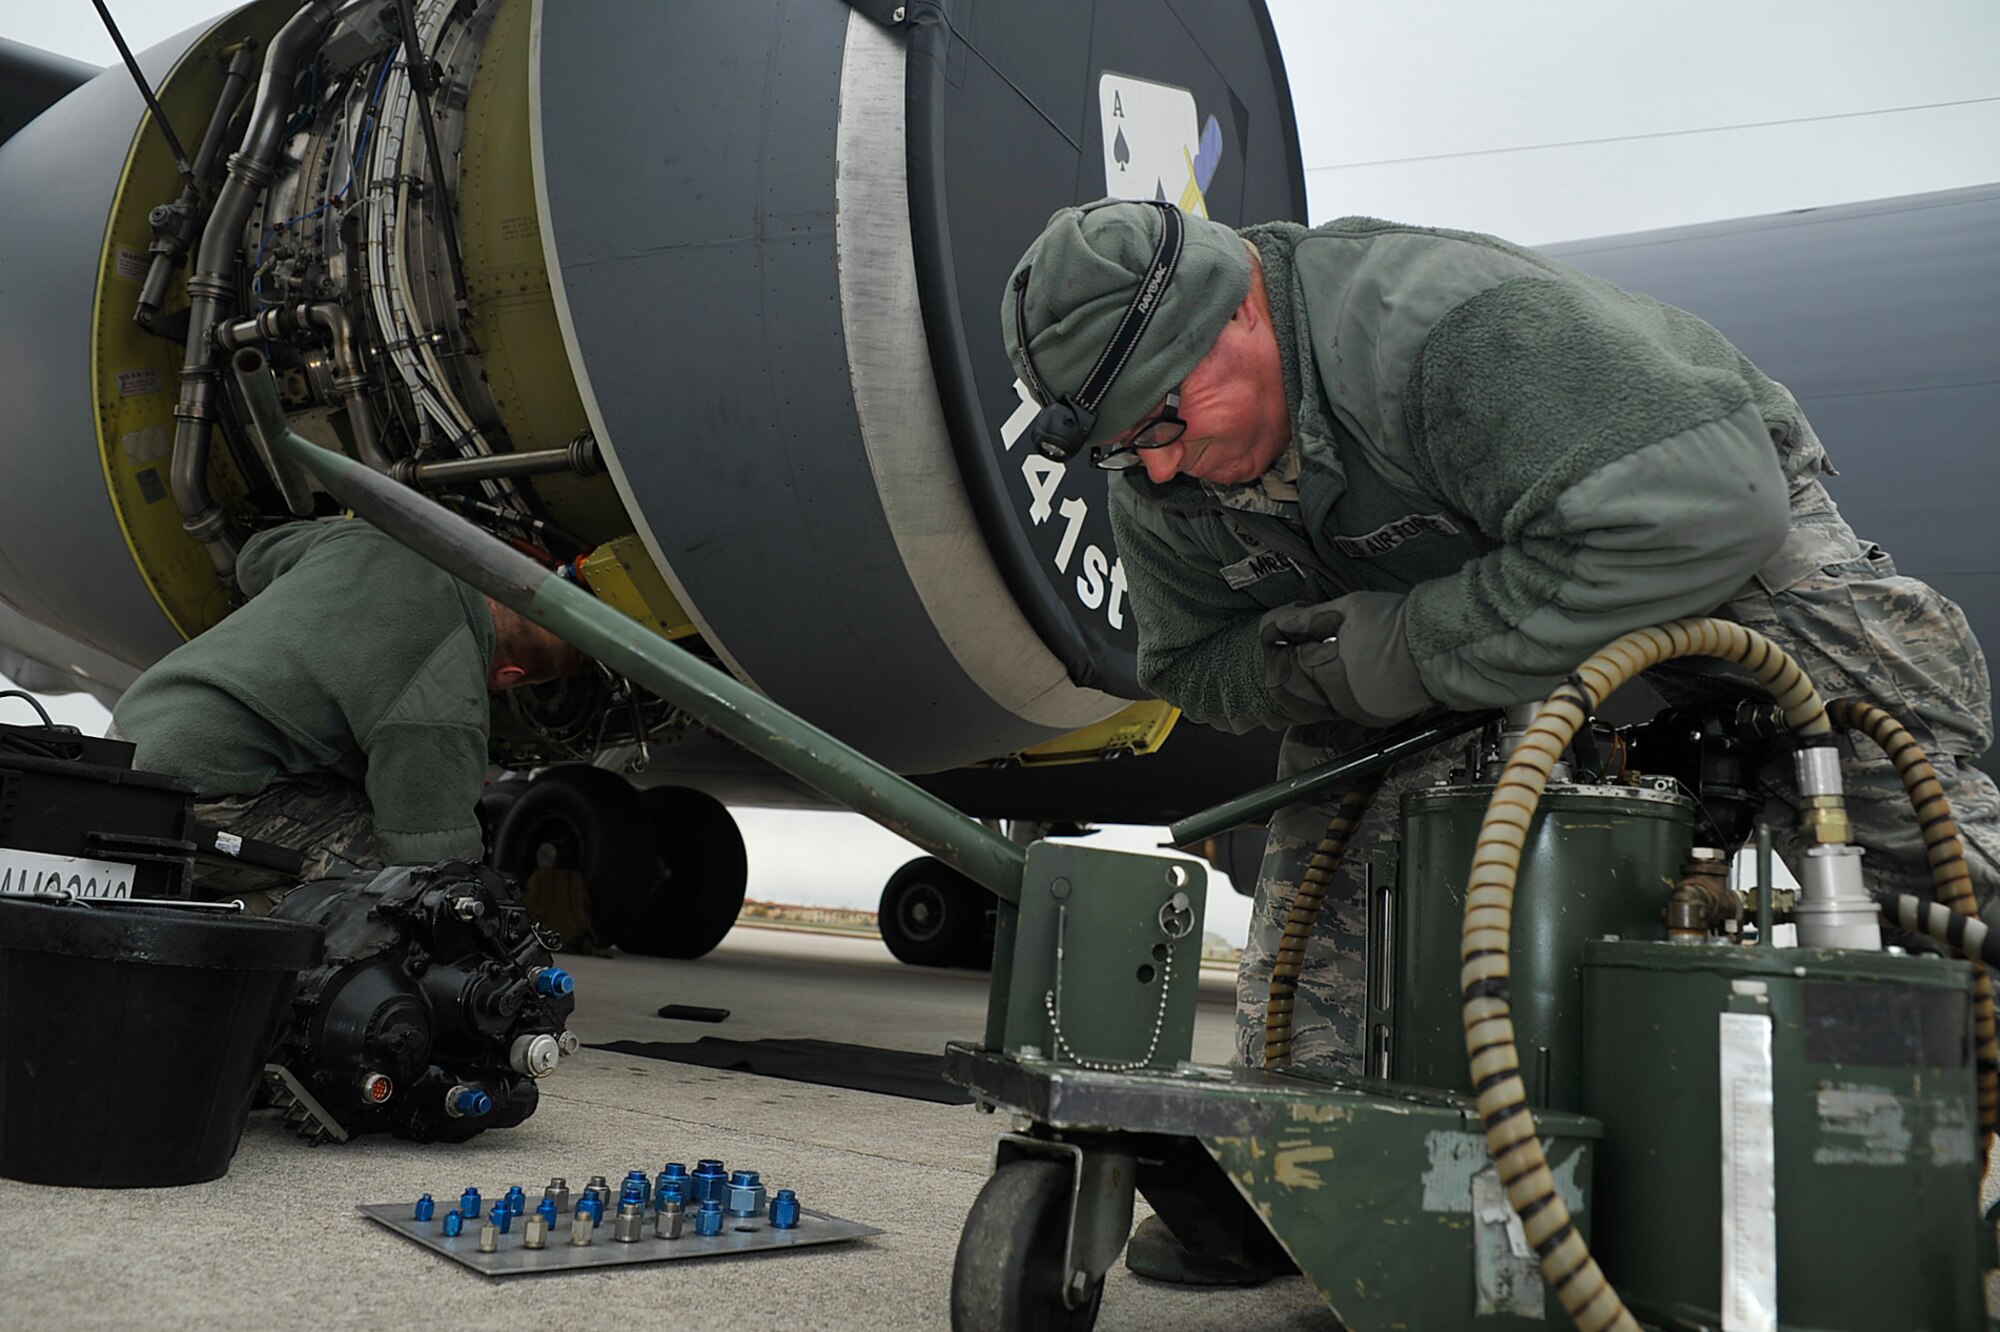 Master Sgt. Carter Marcy, 141st Maintenance Squadron aerospace propulsion specialist, performs maintenance on a KC-135 Stratotanker Nov., 13, 2017, at Aviano Air Base, Italy. Airmen from the 141st Air Refueling Wing trained with F-16 Fighting Falcons from the 31st Fighter Wing on aerial refueling operations. (Washington Air National Guard photo by Tech. Sgt. Tim Chacon)